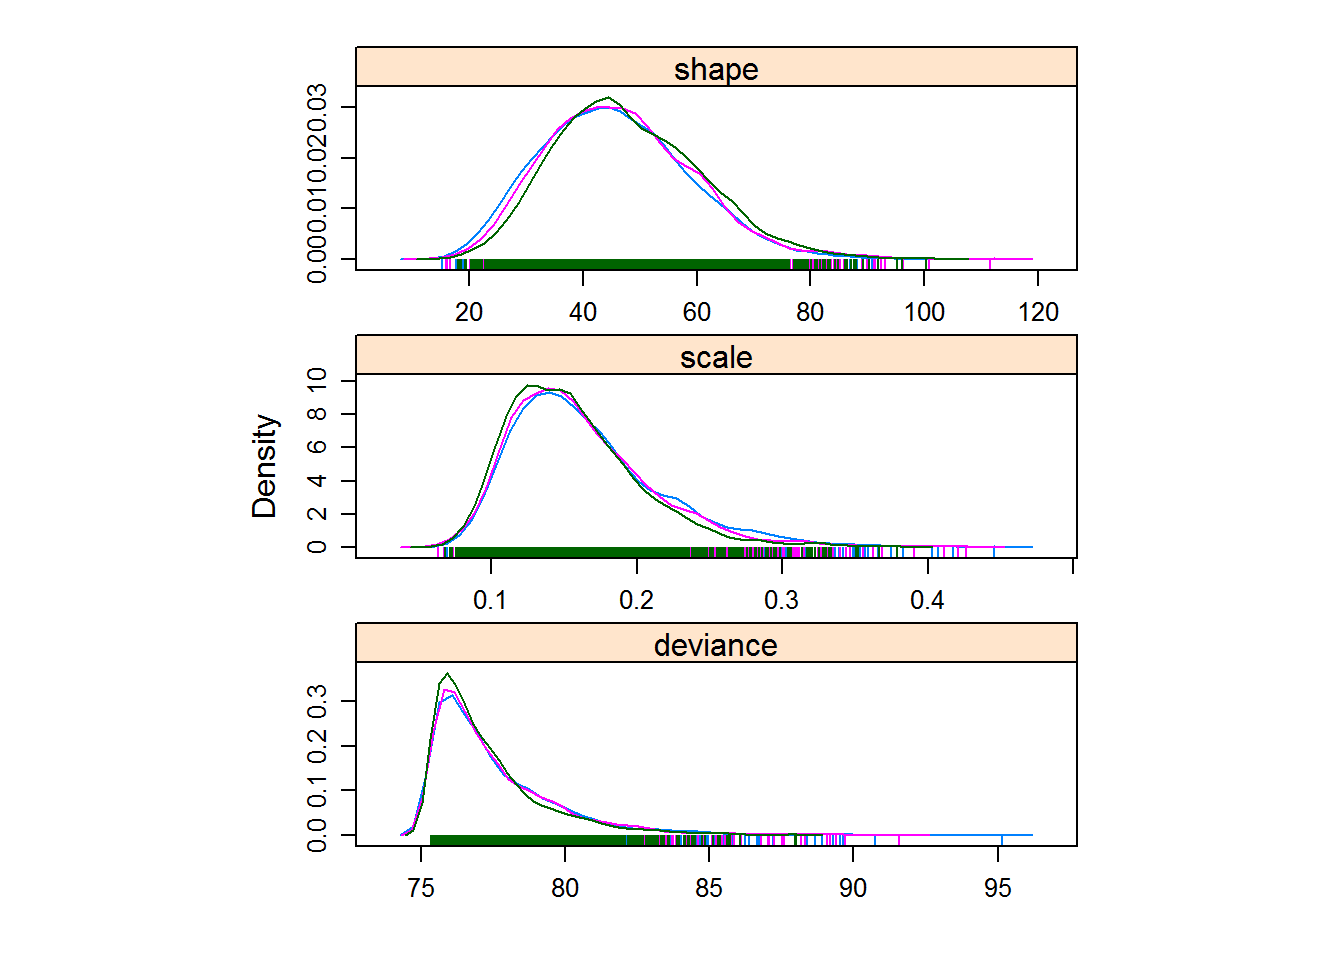 Histograms and density plots are a good way to visualize convergence.